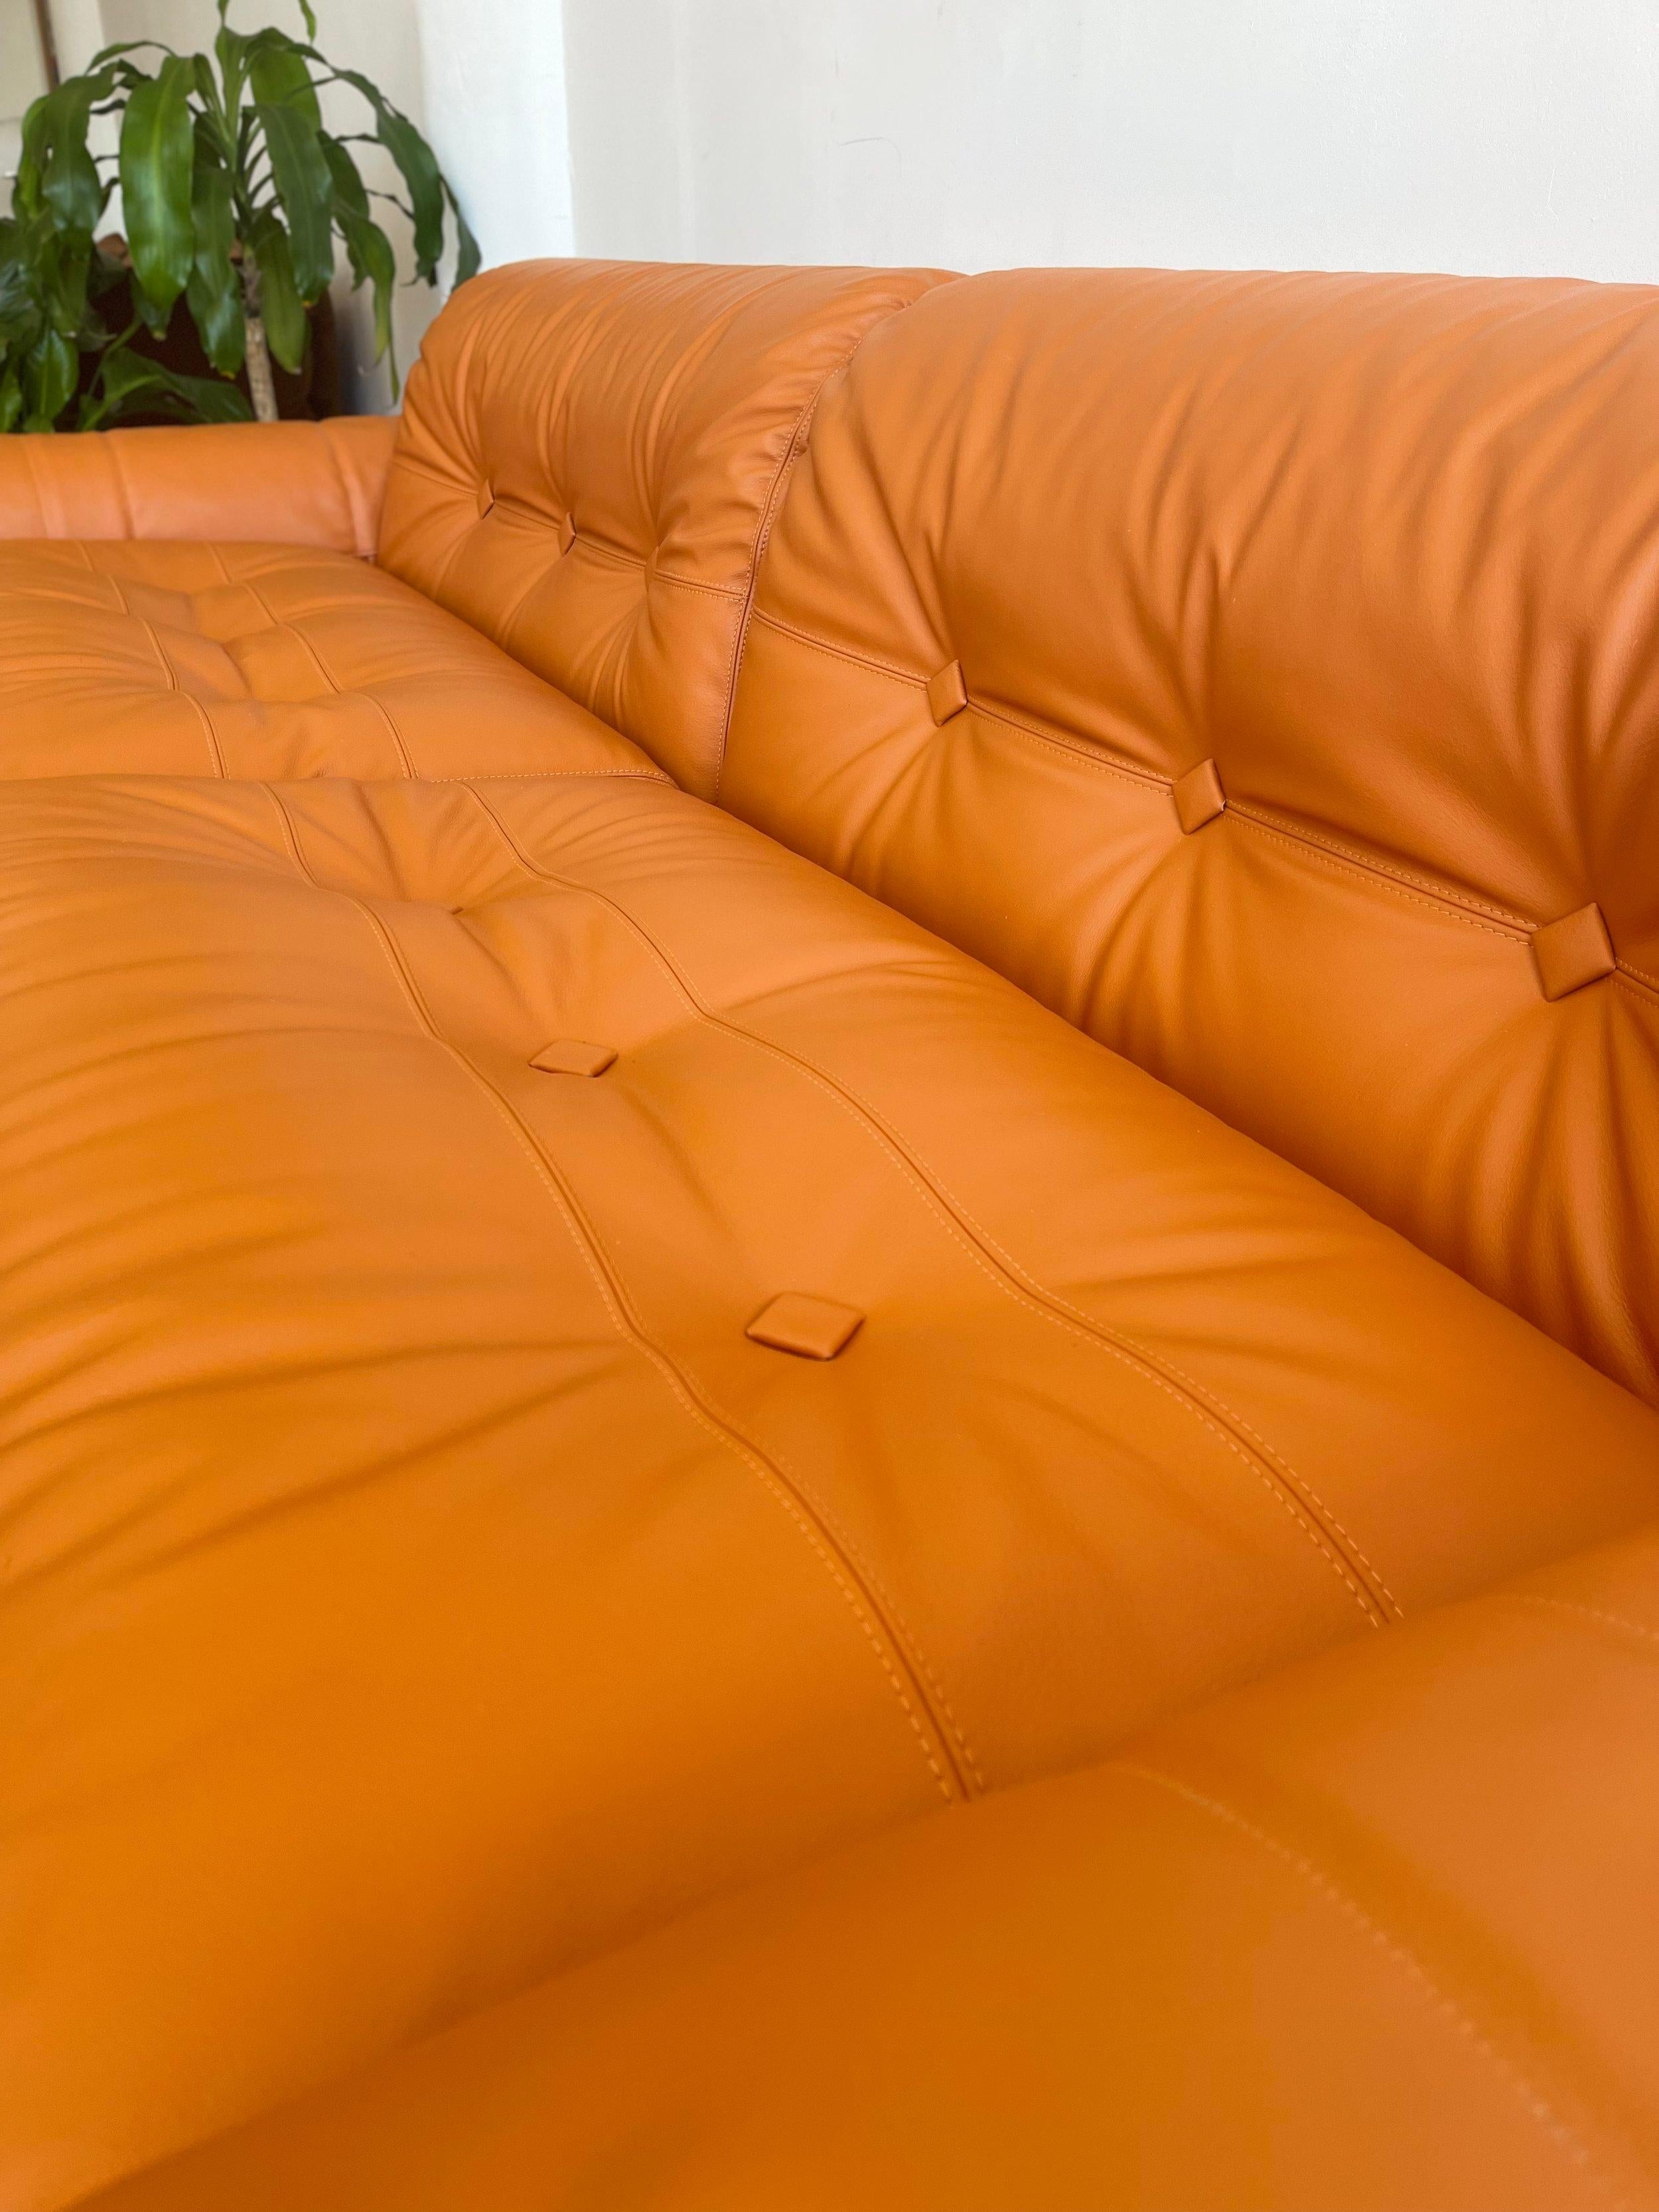 Adriano Piazzesi 1970s Sofa Newly Upholstered with Copper Brown Italian Leather For Sale 3